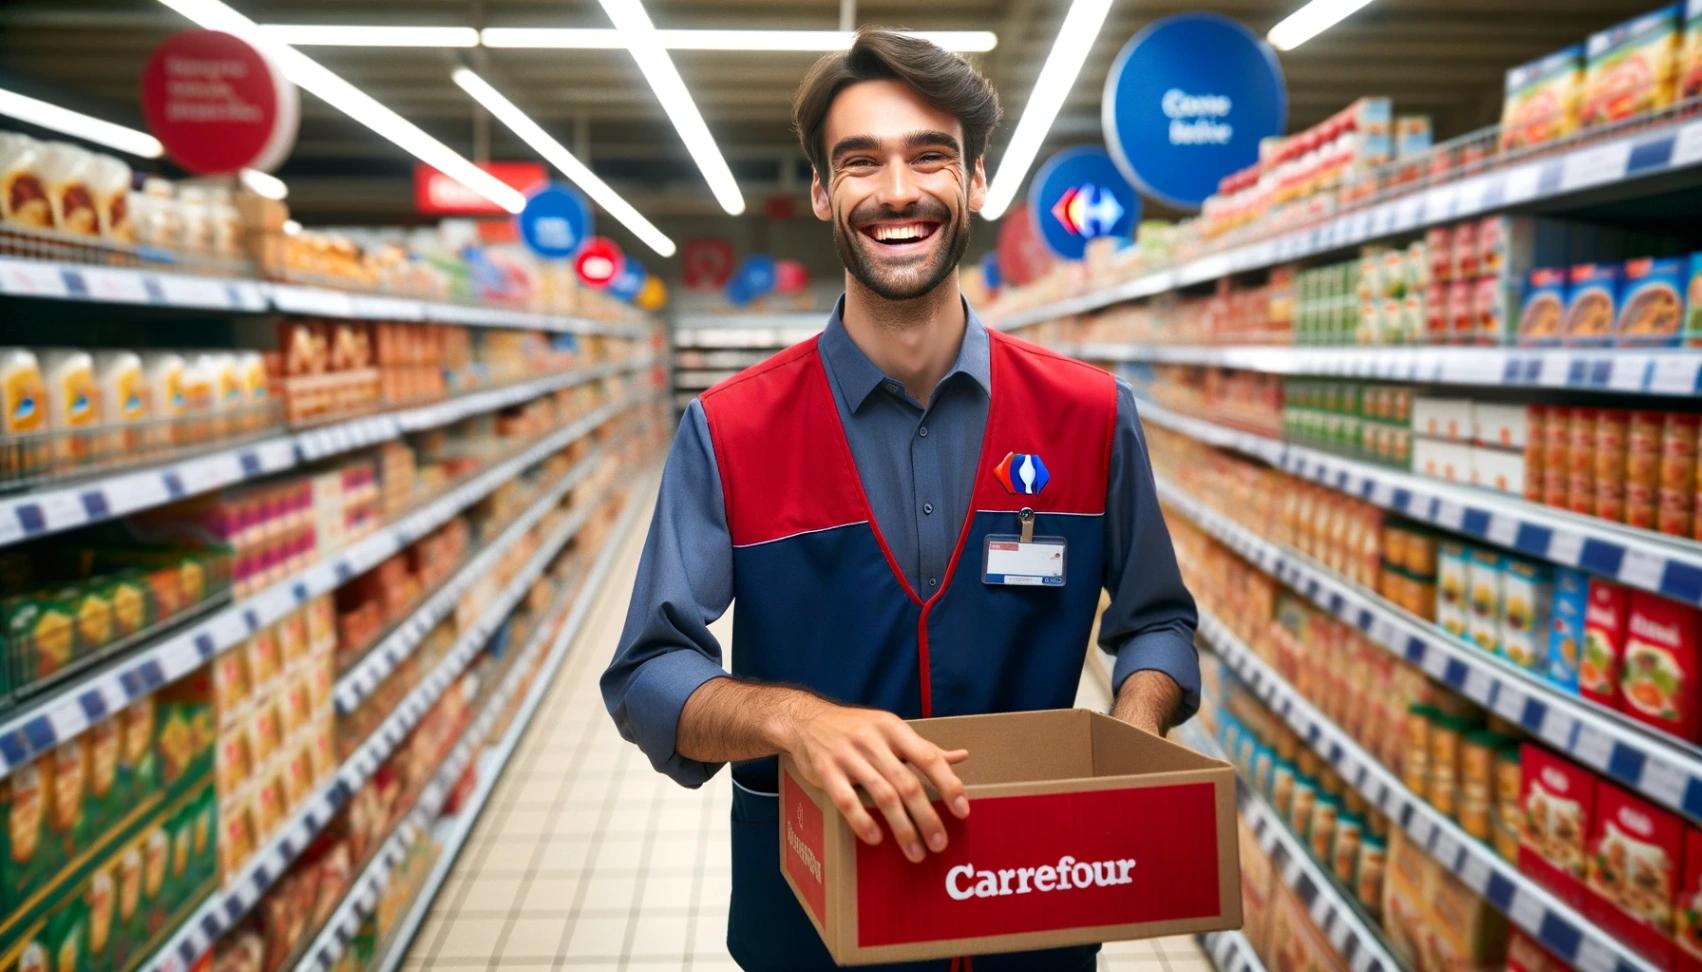 Carrefour is Hiring - How to Apply for a Carrefour Jobs